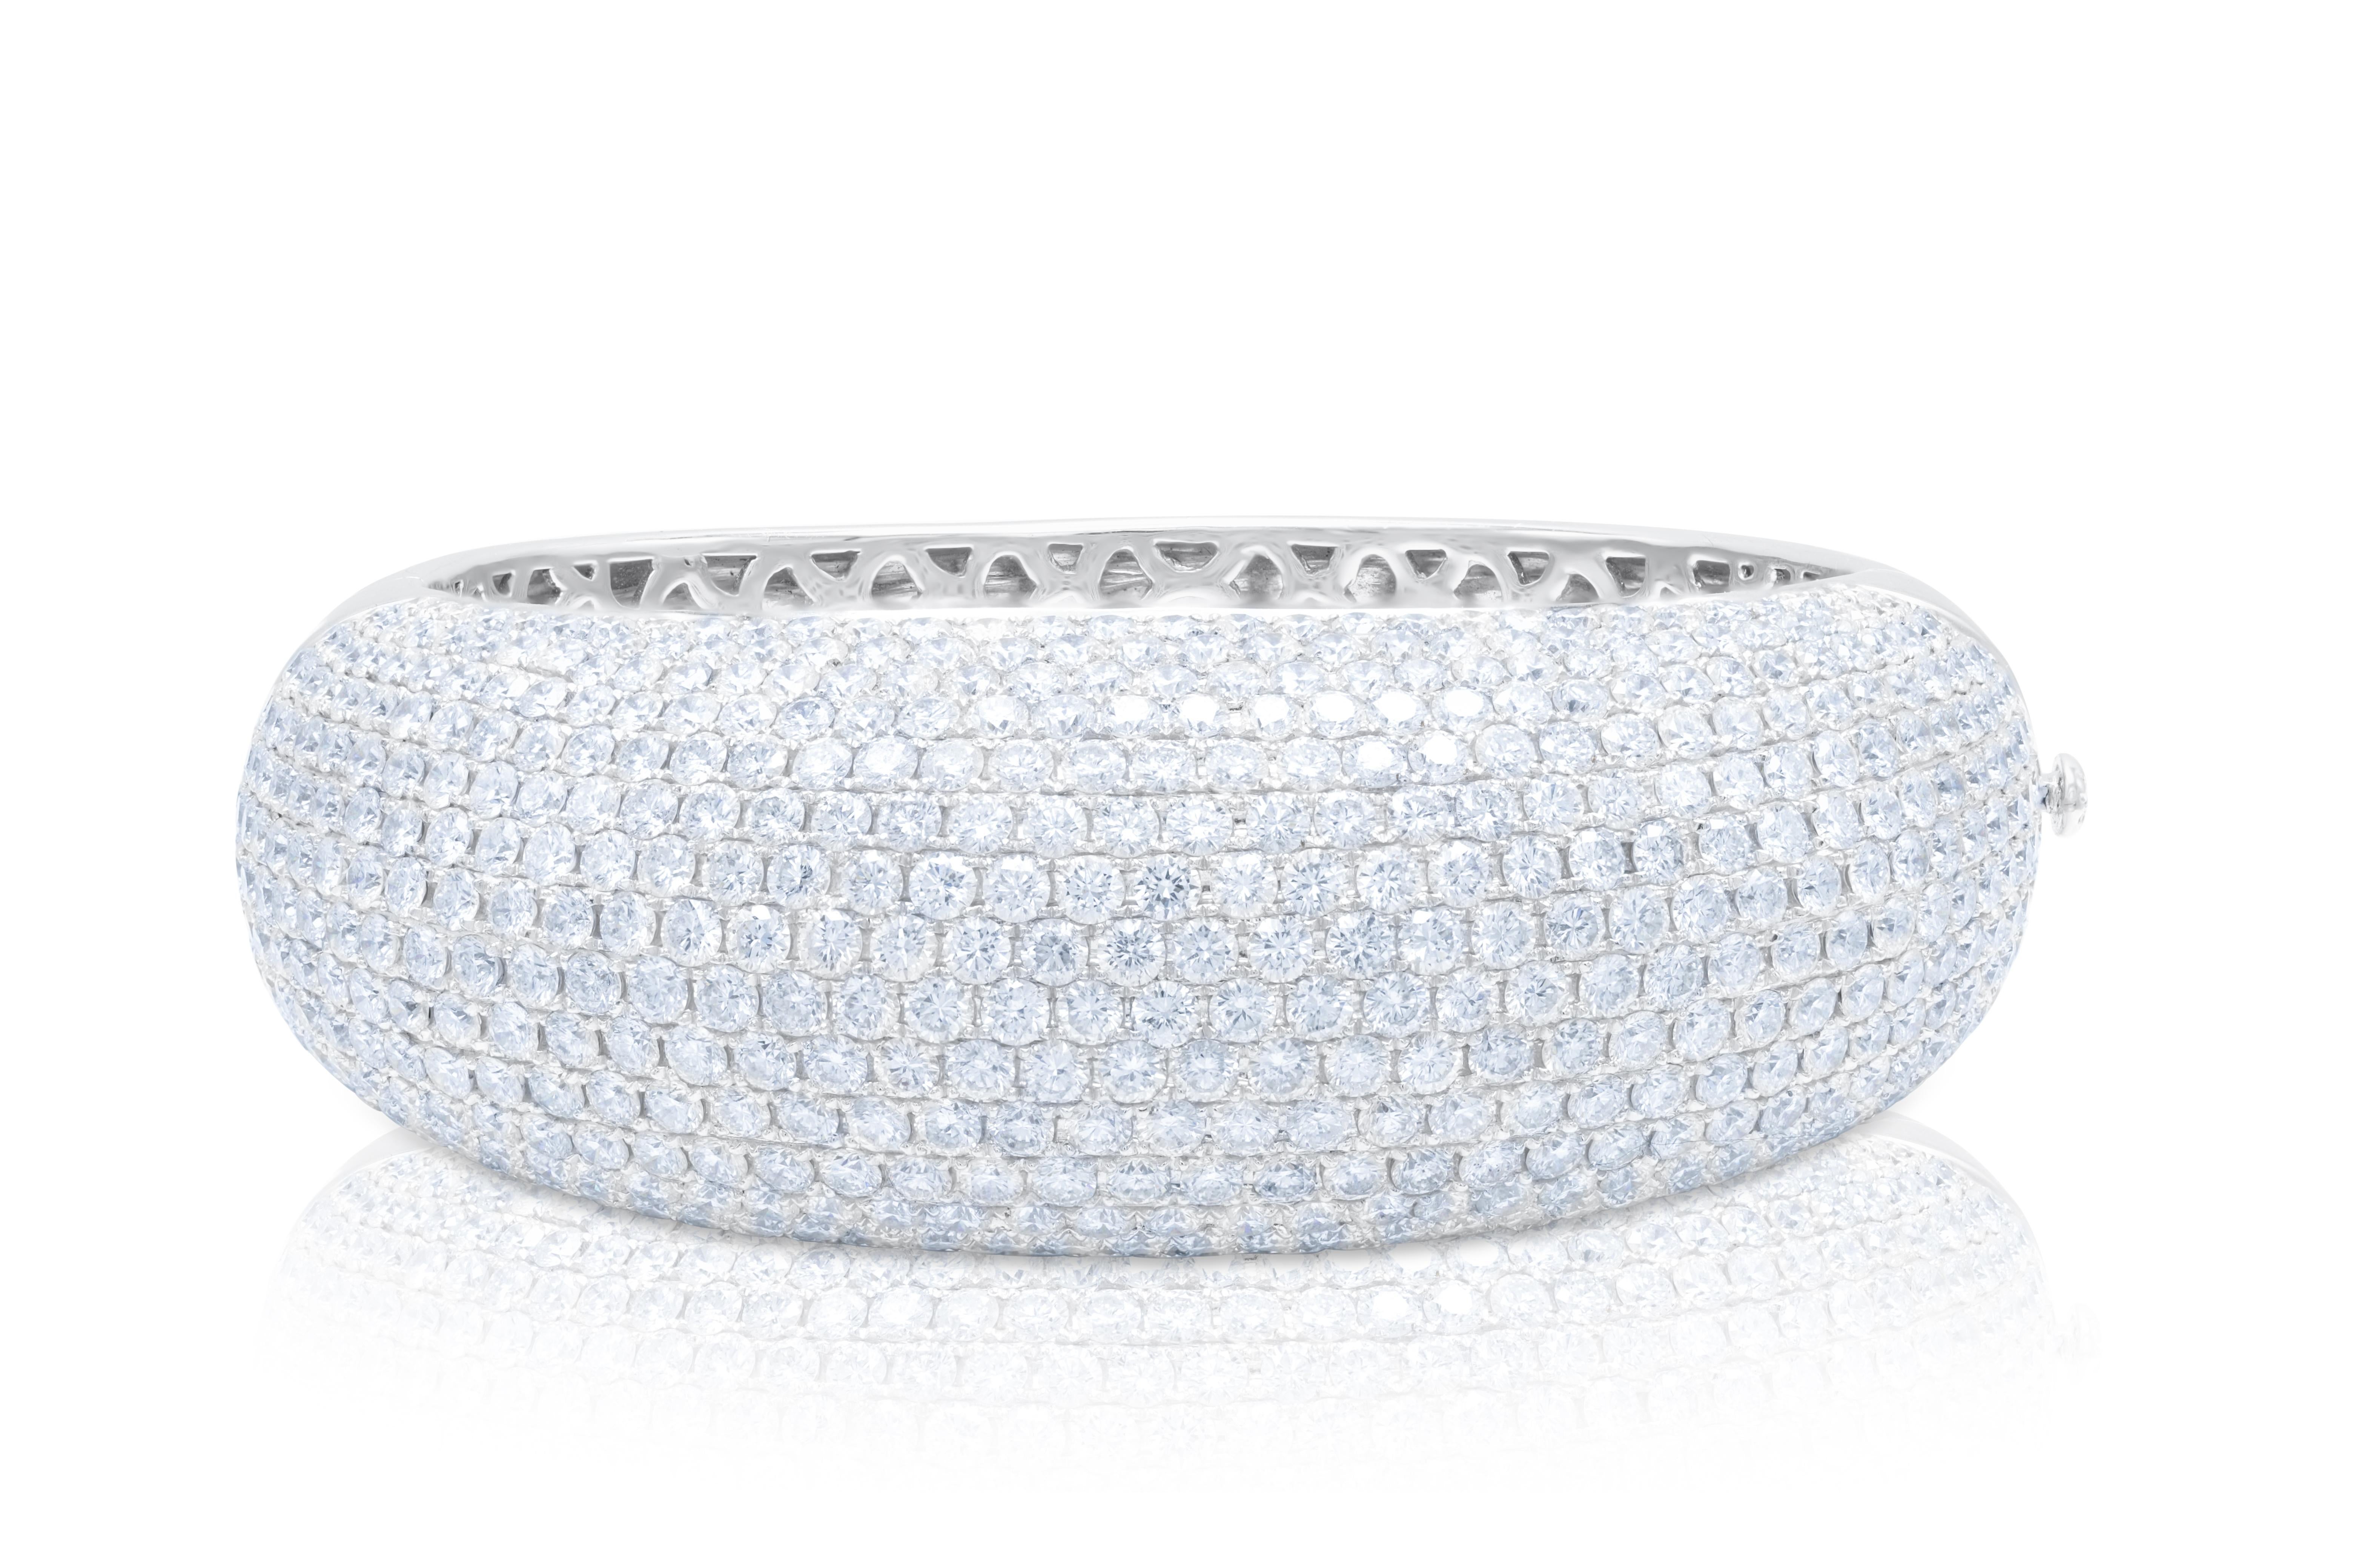 18 kt white gold pave bangle adorned with multiple rows of 35.00 cts tw of diamonds going half-way around
Diana M. is a leading supplier of top-quality fine jewelry for over 35 years.
Diana M is one-stop shop for all your jewelry shopping, carrying